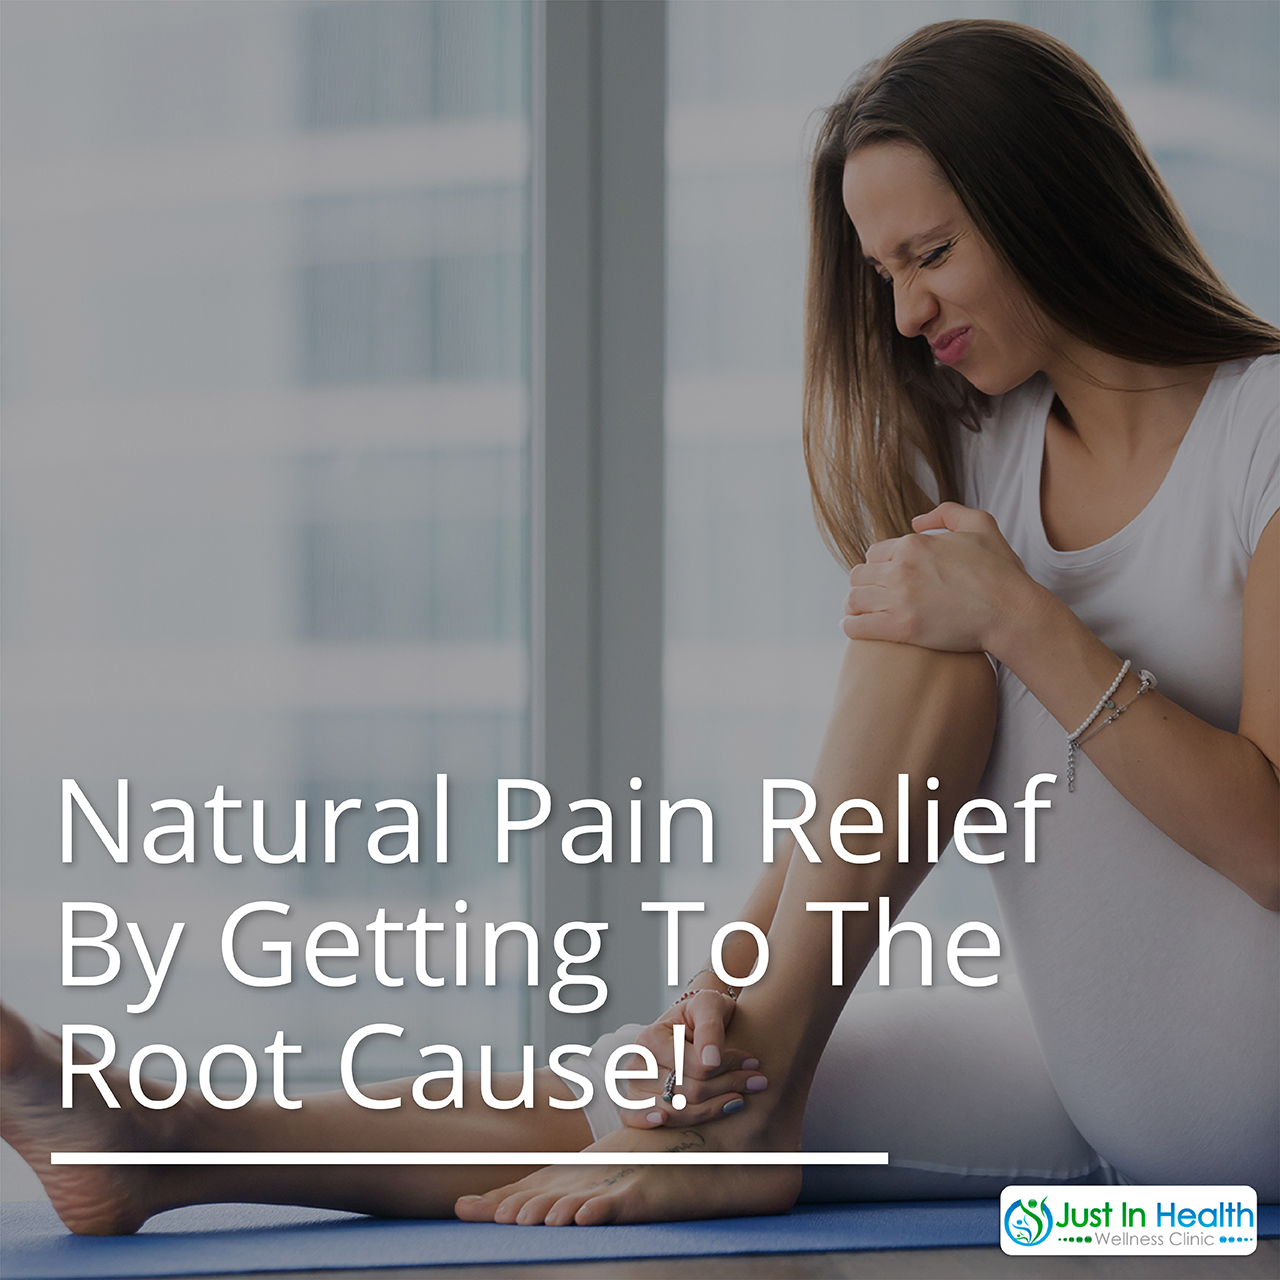 Natural Pain Relief By Getting To The Root Cause